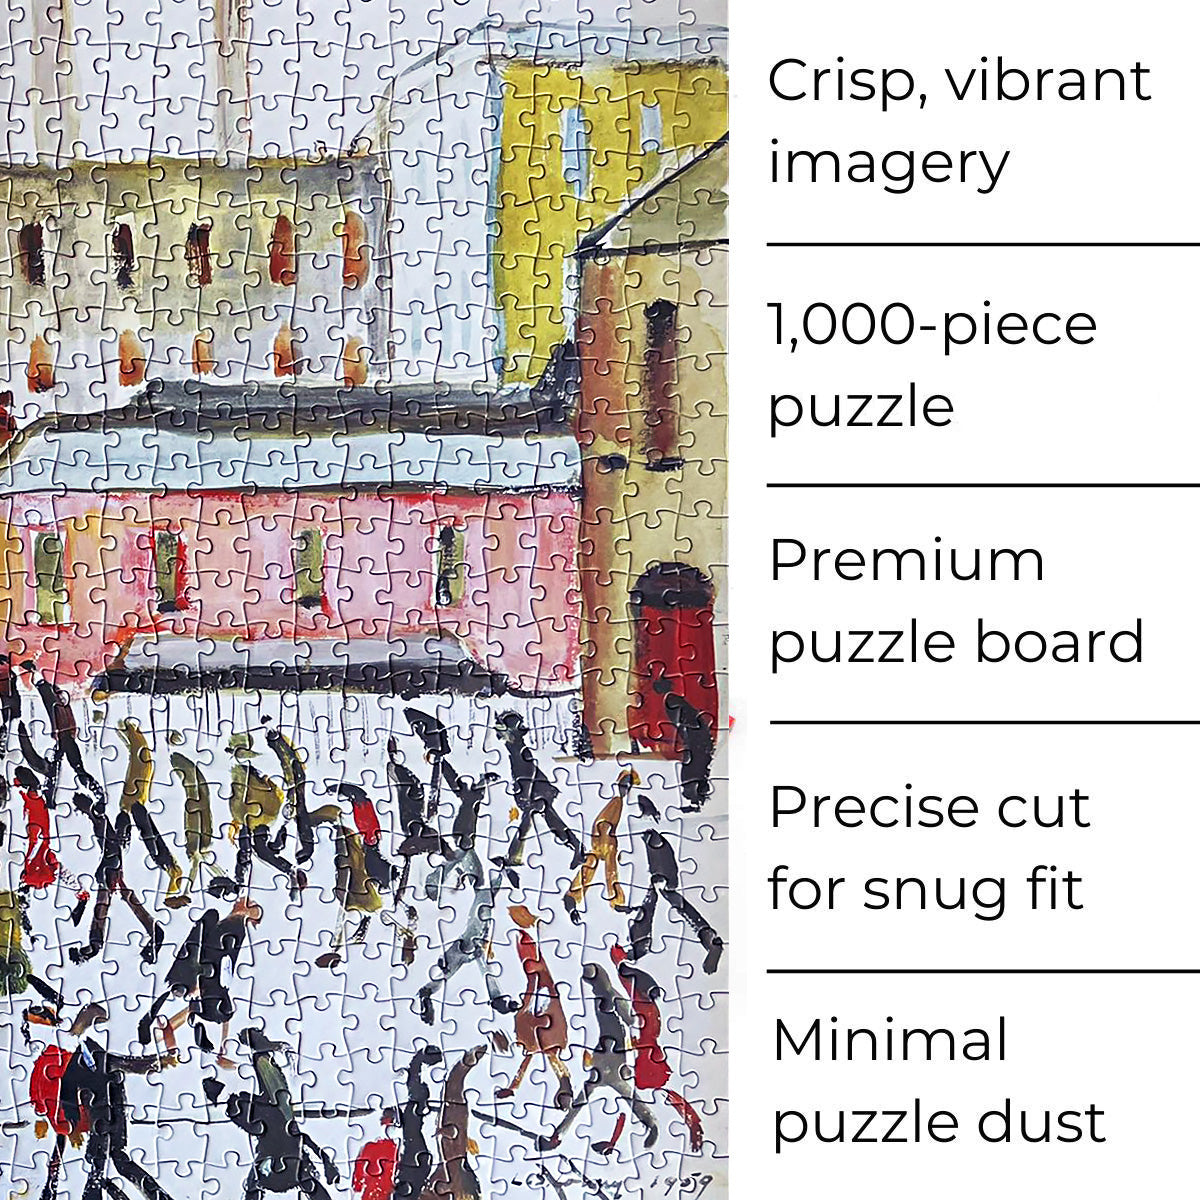 The pieces of the Lowry jigsaw puzzle are precision-cut from thick 2mm cardboard to ensure a snug fit with minimal puzzle dust.